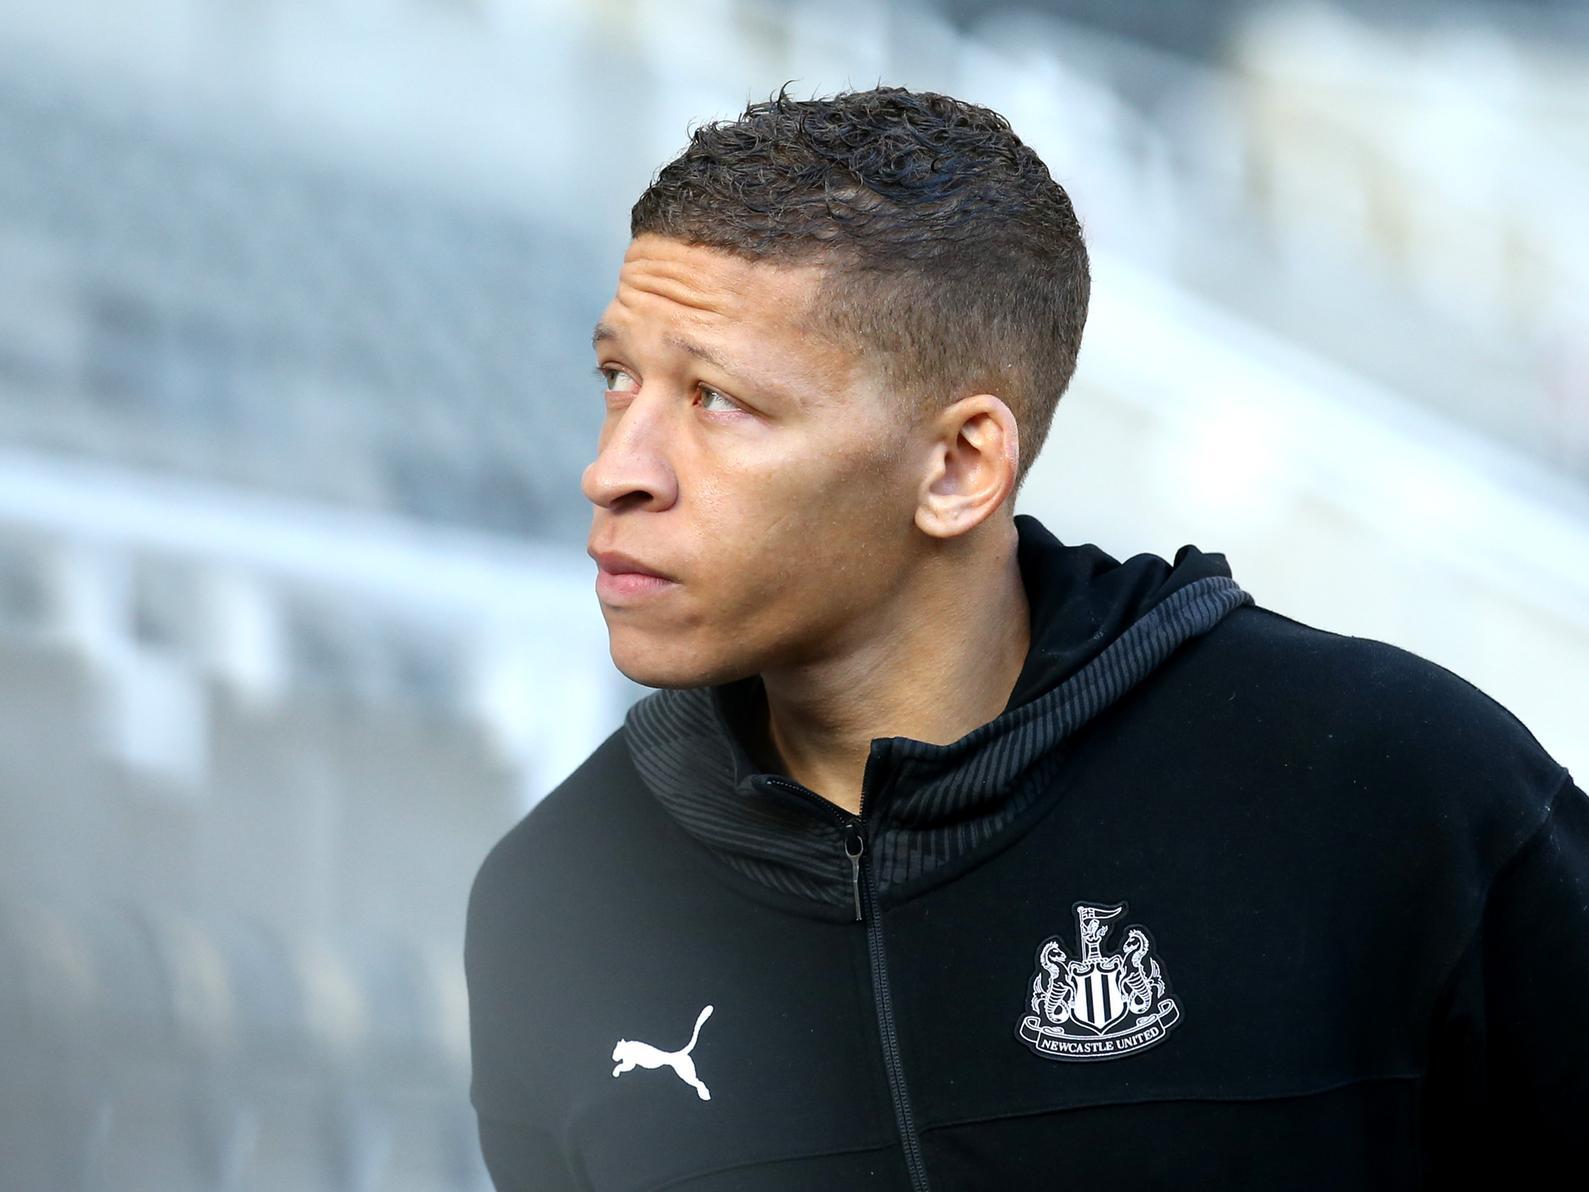 Nottingham Forest have receiveda boost in their attempts to sign Newcastle United's 20m-rated striker Dwight Gayle, after Aston Villa pulled out of the race to secure his services. (Telegraph)